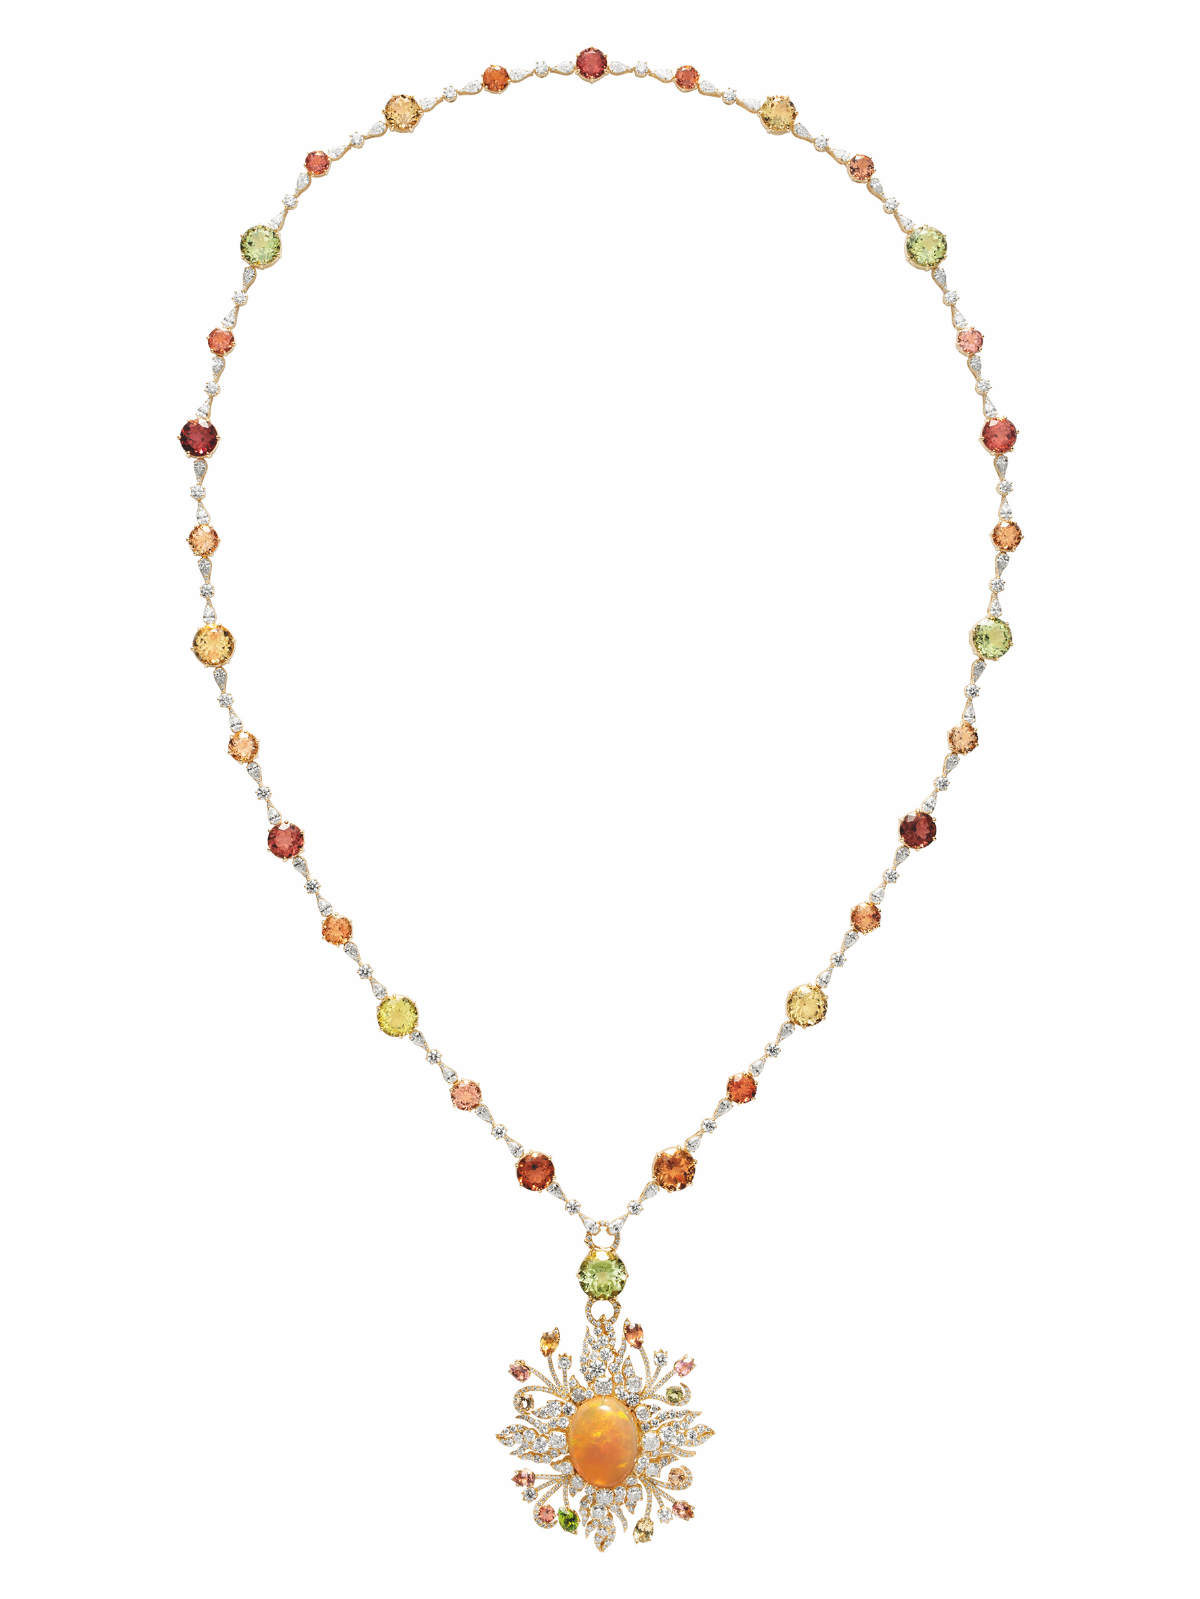 Hortus Deliciarum: The New Gucci High Jewelry Collection